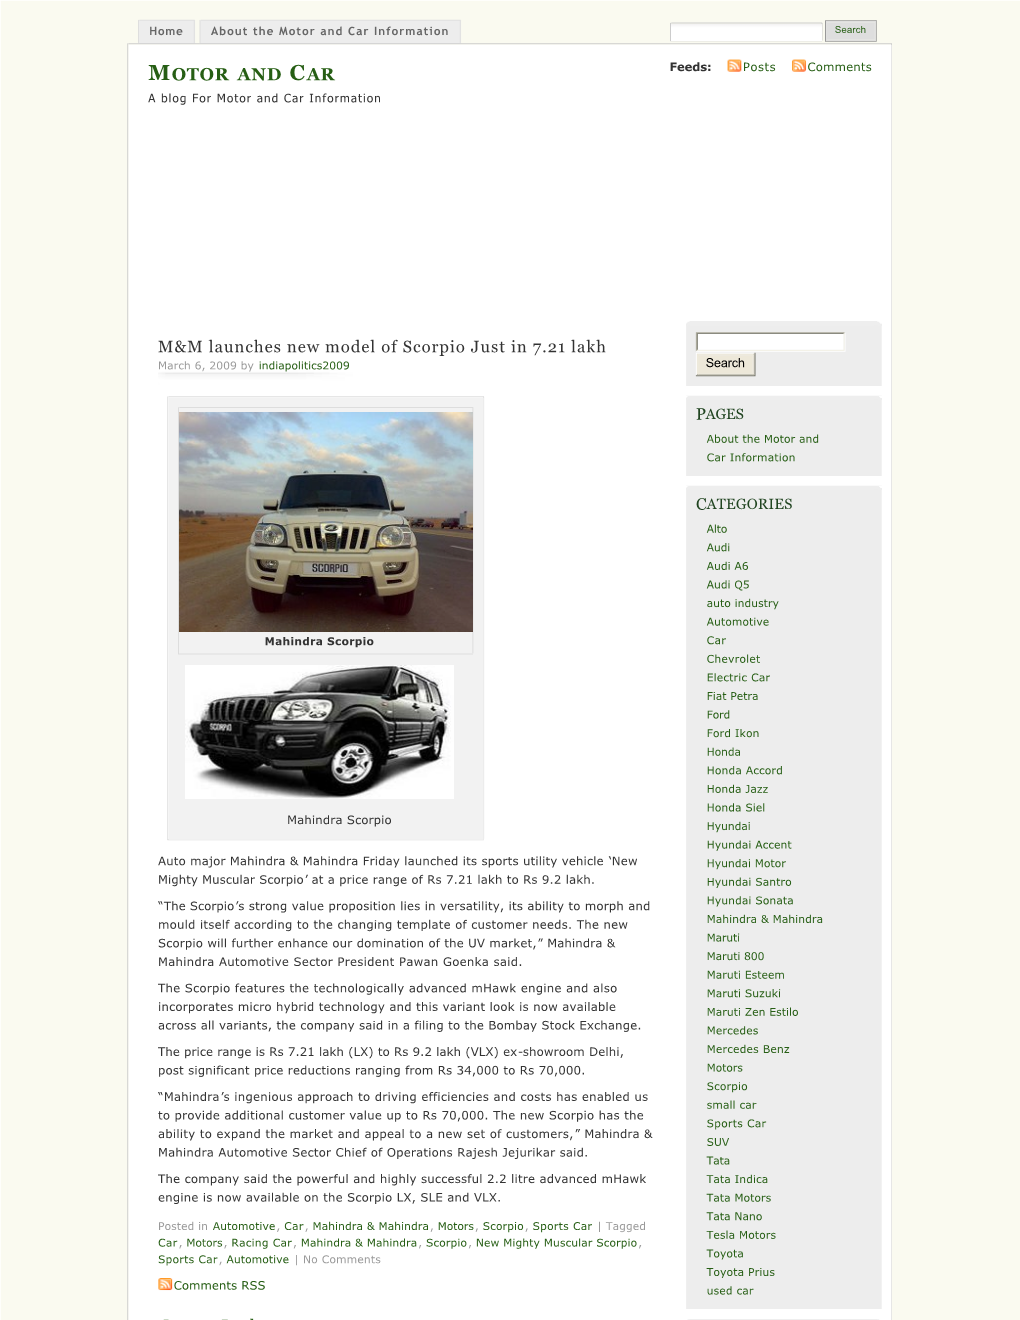 Motor and Car Information Search